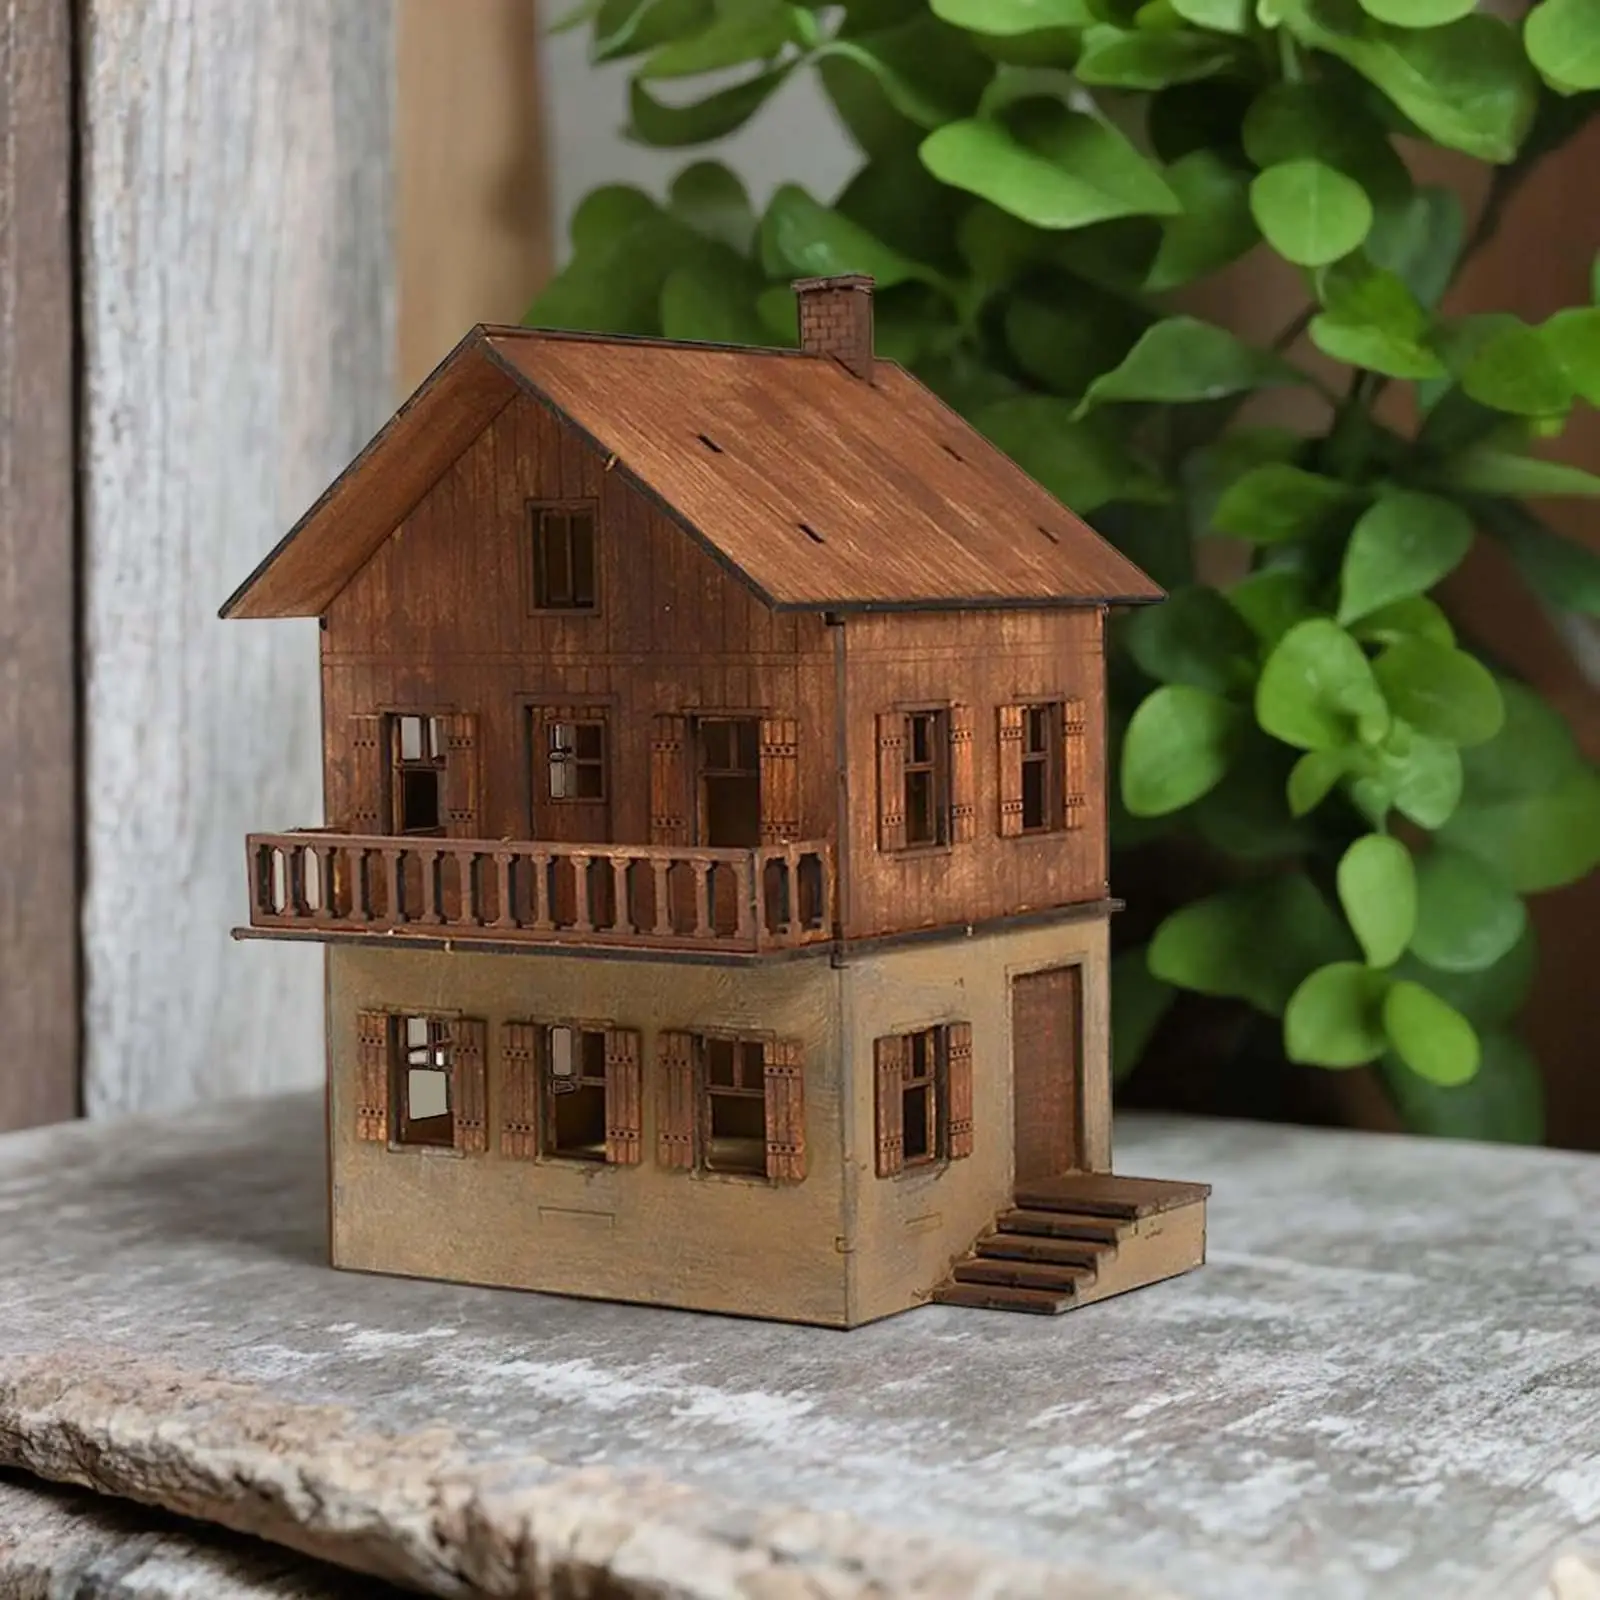 Wooden Model Kits House Unassembly Buiilding Model Architecture Kits DIY Crafts DIY Wooden House Assemble Diorama Layout